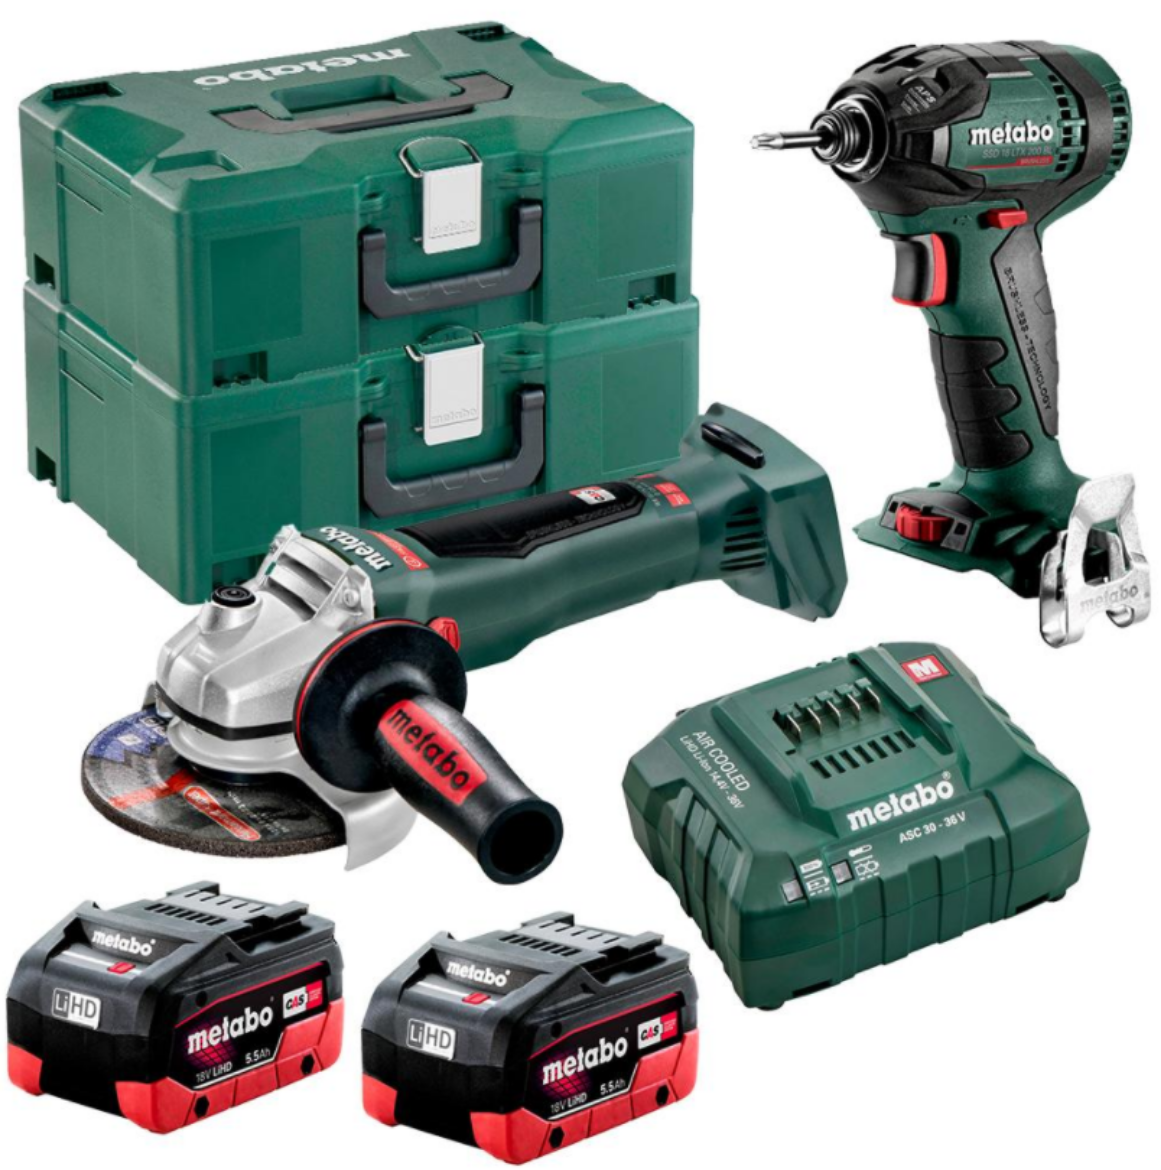 Picture of METABO 2 PIECE KIT 200NM BRUSHLESS IMPACT DRIVER + 125MM BRUSHLESS ANLGE GRINDER - SSD WB 125 BL M HD 5.5